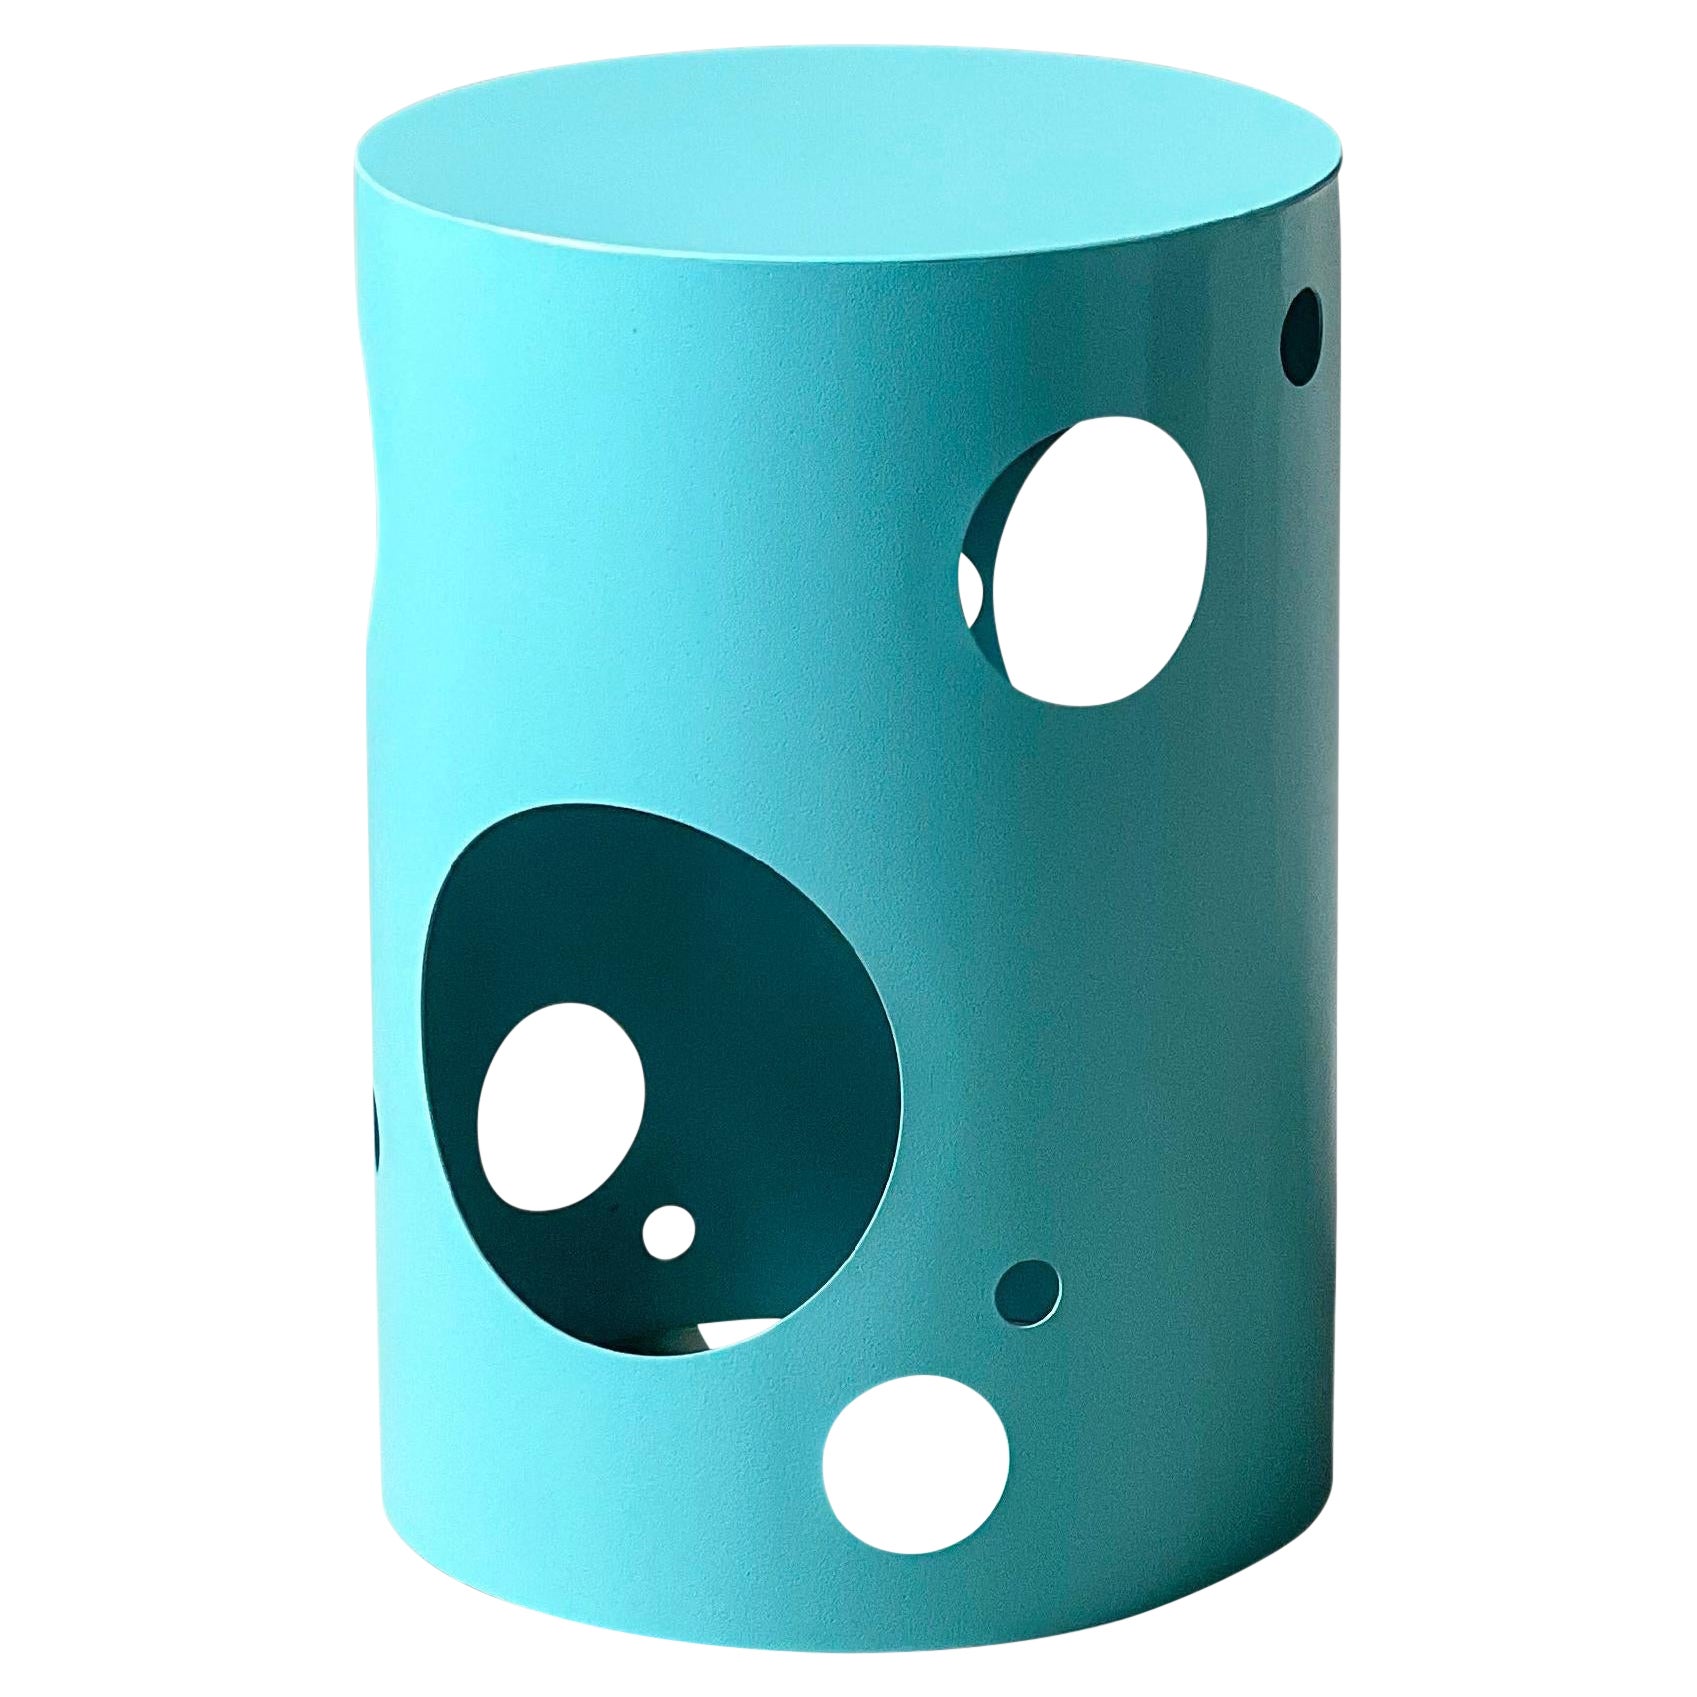 Round Side table / stool in Tiffany Blue - Spage Age Italian Designer For Sale